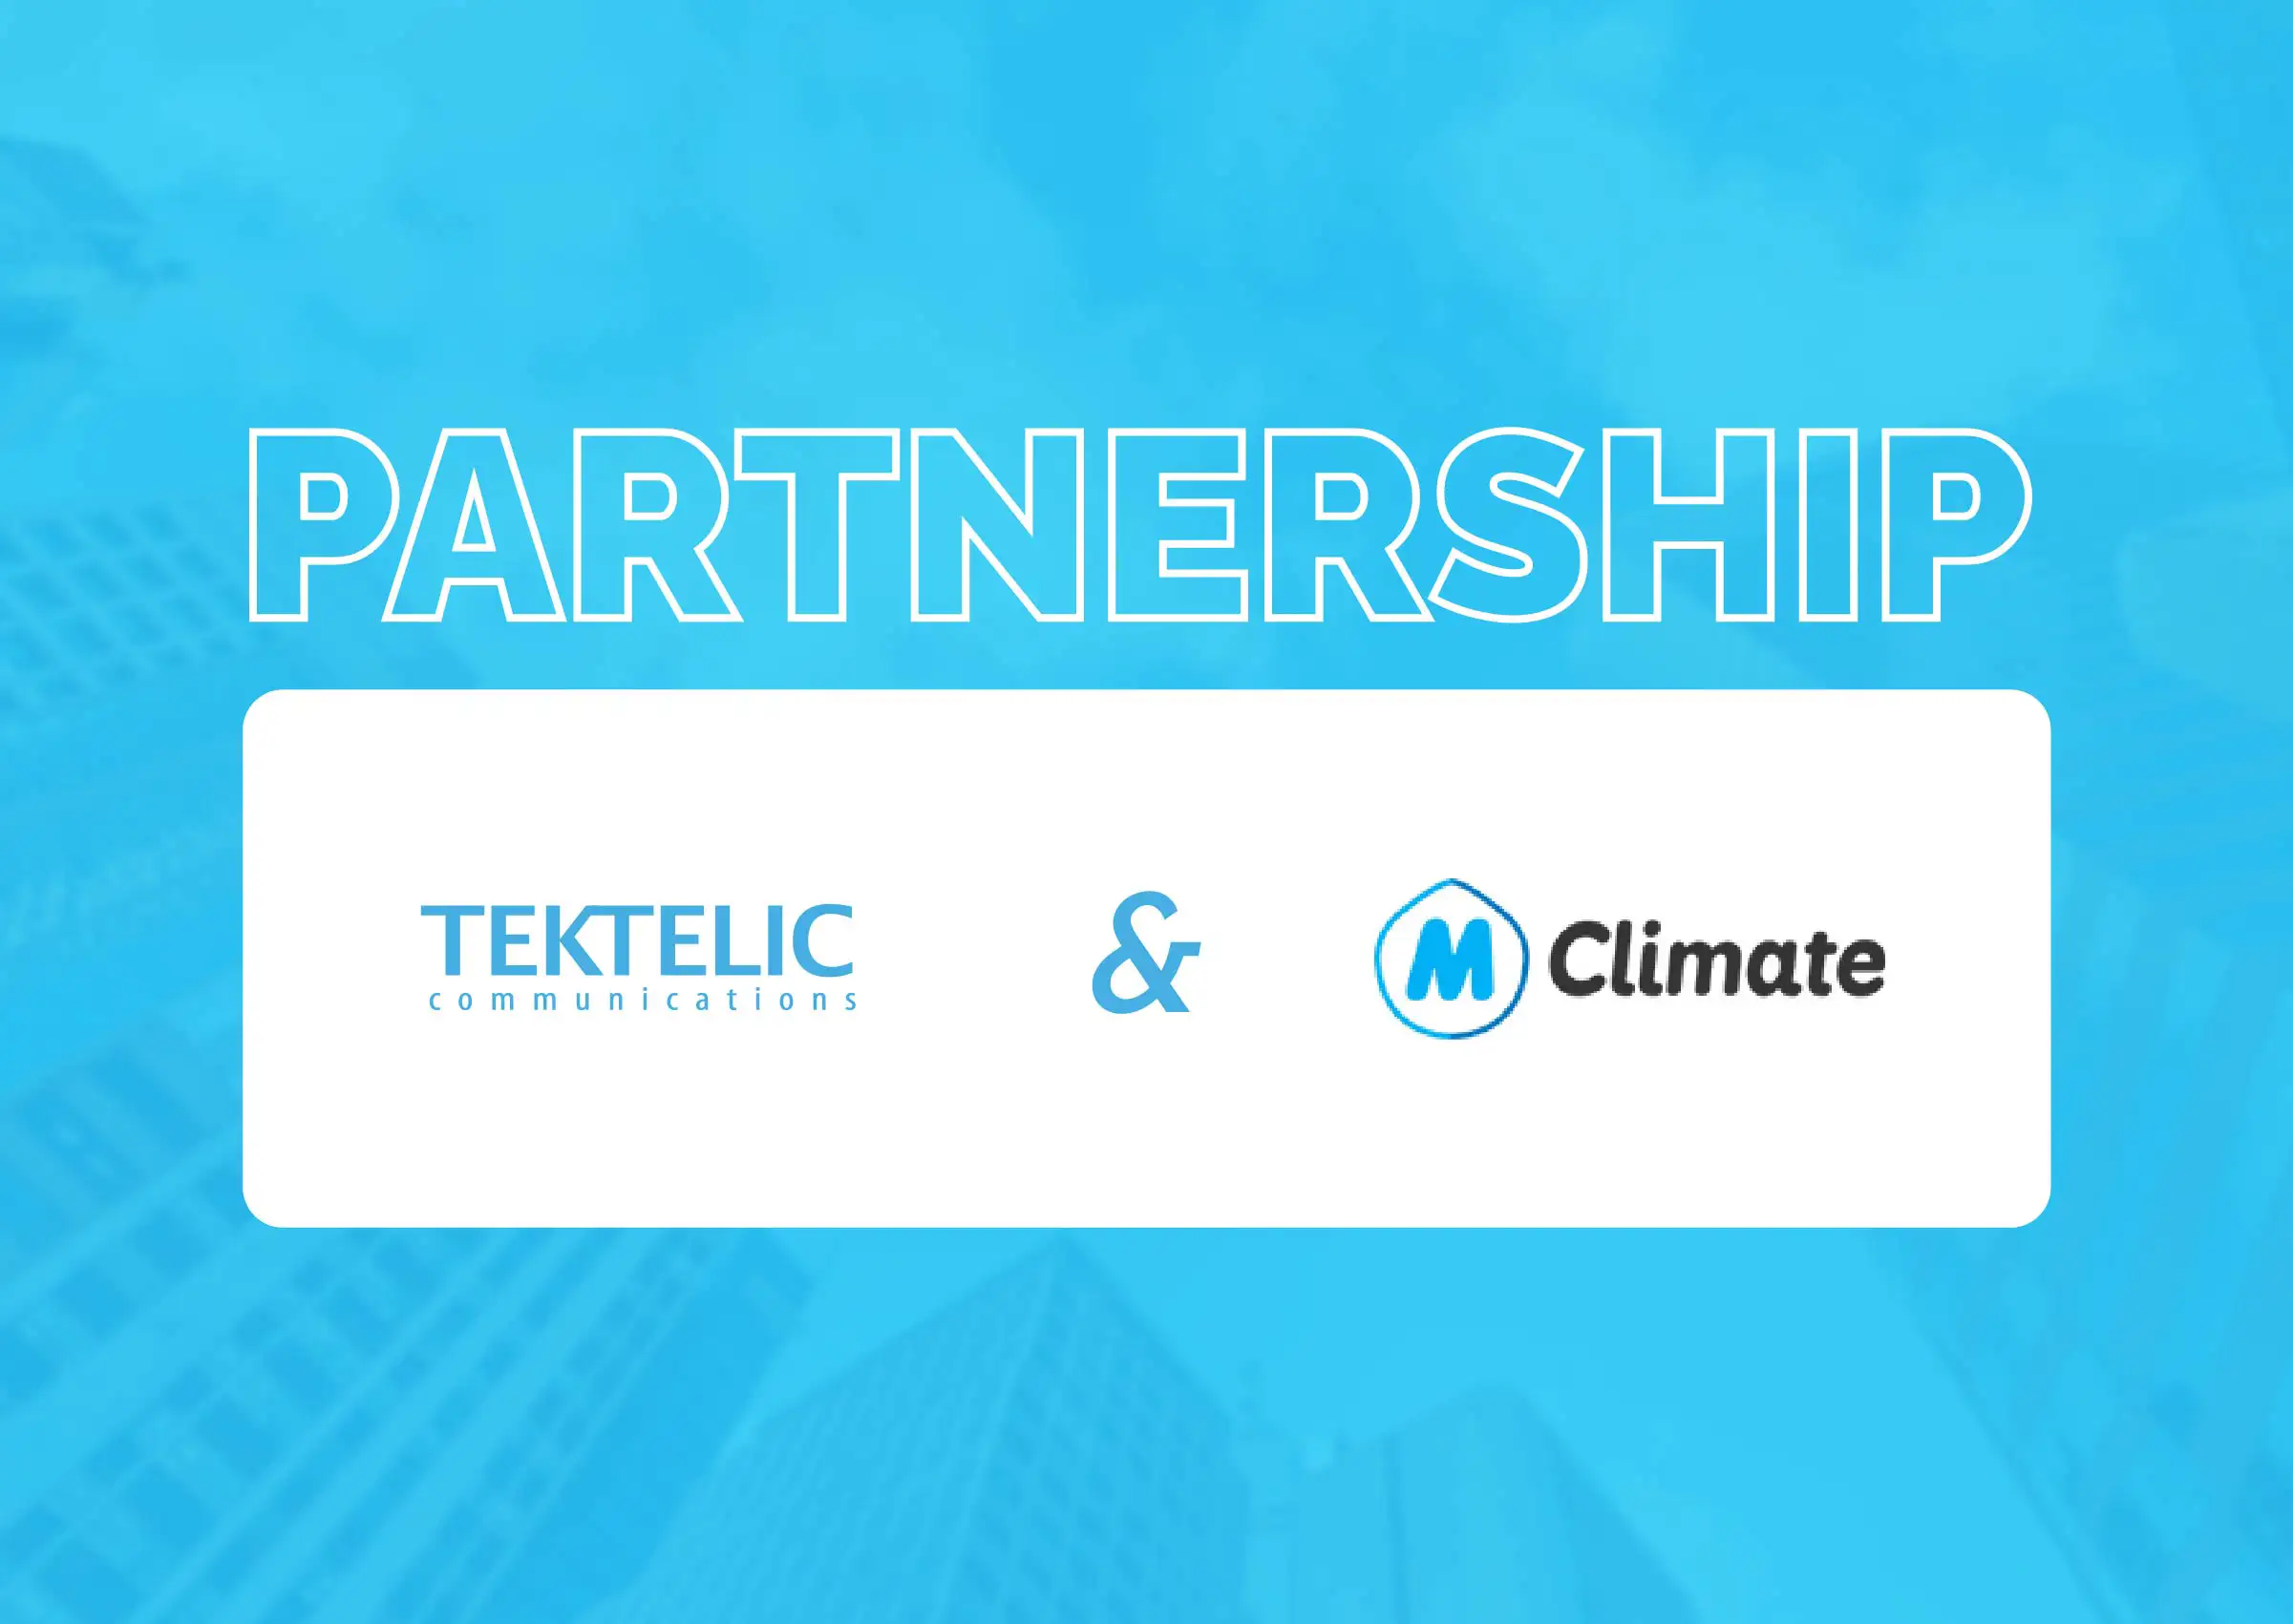 TEKTELIC and MClimate come together with an innovative Solution